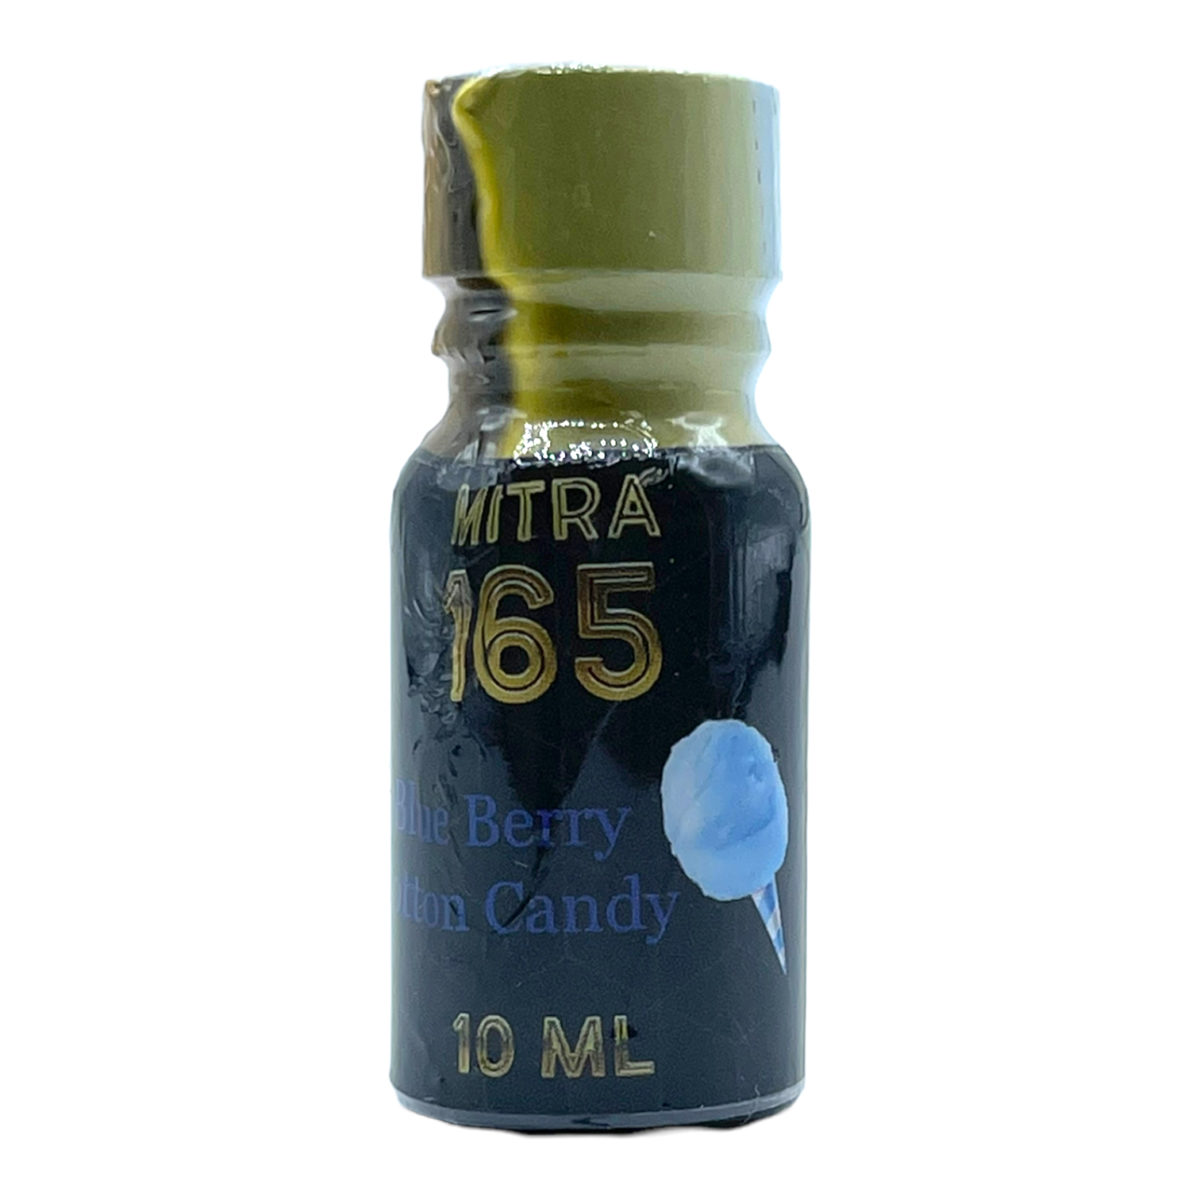 MITRA 165 Kratom Blue Berry Cotton Candy Extract Shot – 10ml